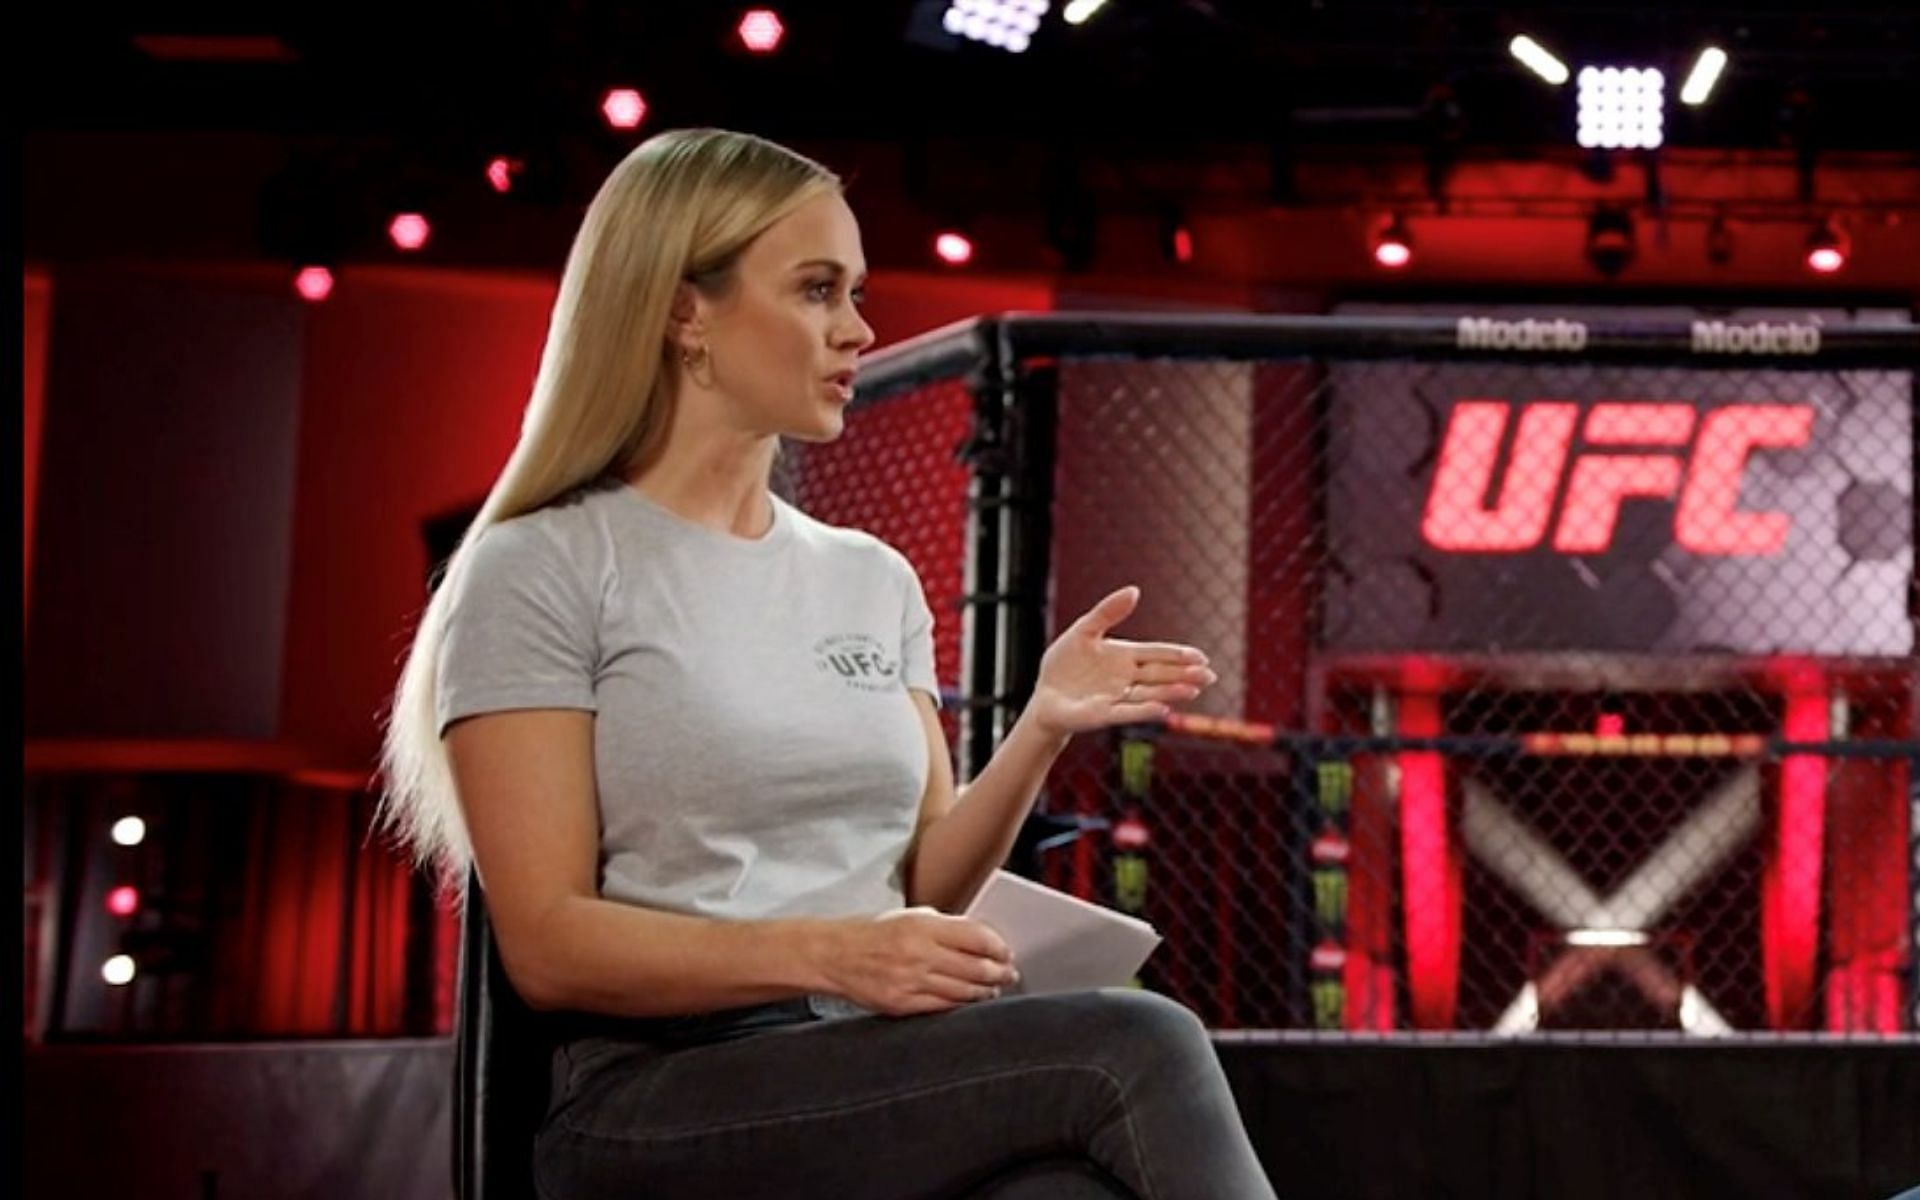 Ufc Analyst Laura Sanko Flexes About Fat Diamond Ring Pouring Water On Fans Hopes 